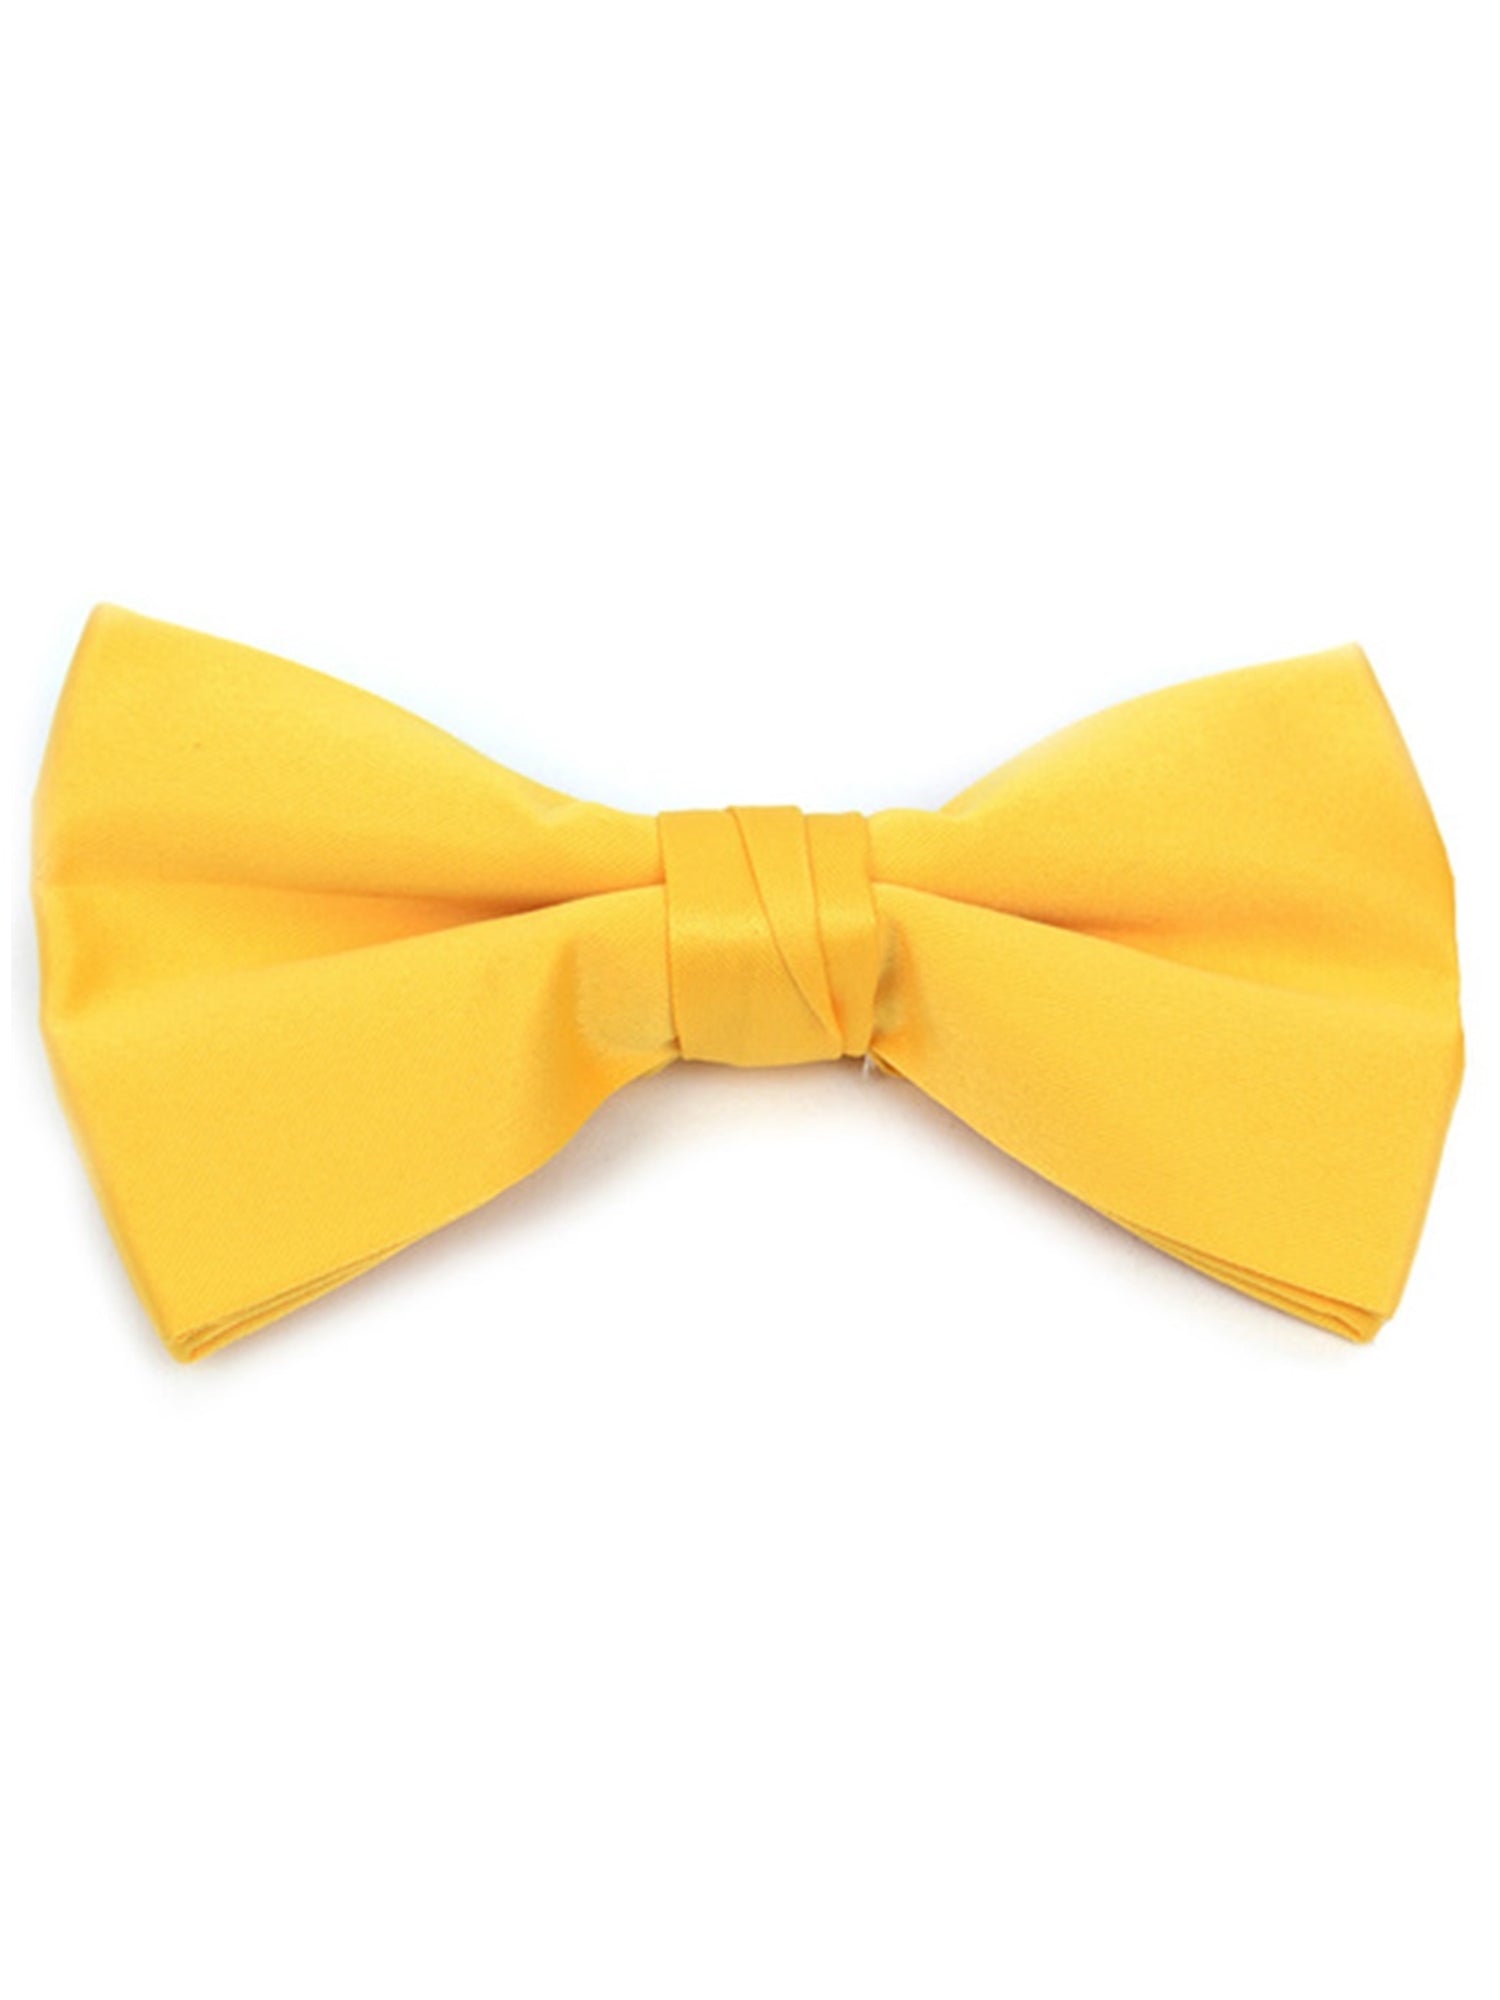 Men's Pre-tied Adjustable Length Bow Tie - Formal Tuxedo Solid Color Men's Solid Color Bow Tie TheDapperTie Yellow One Size 